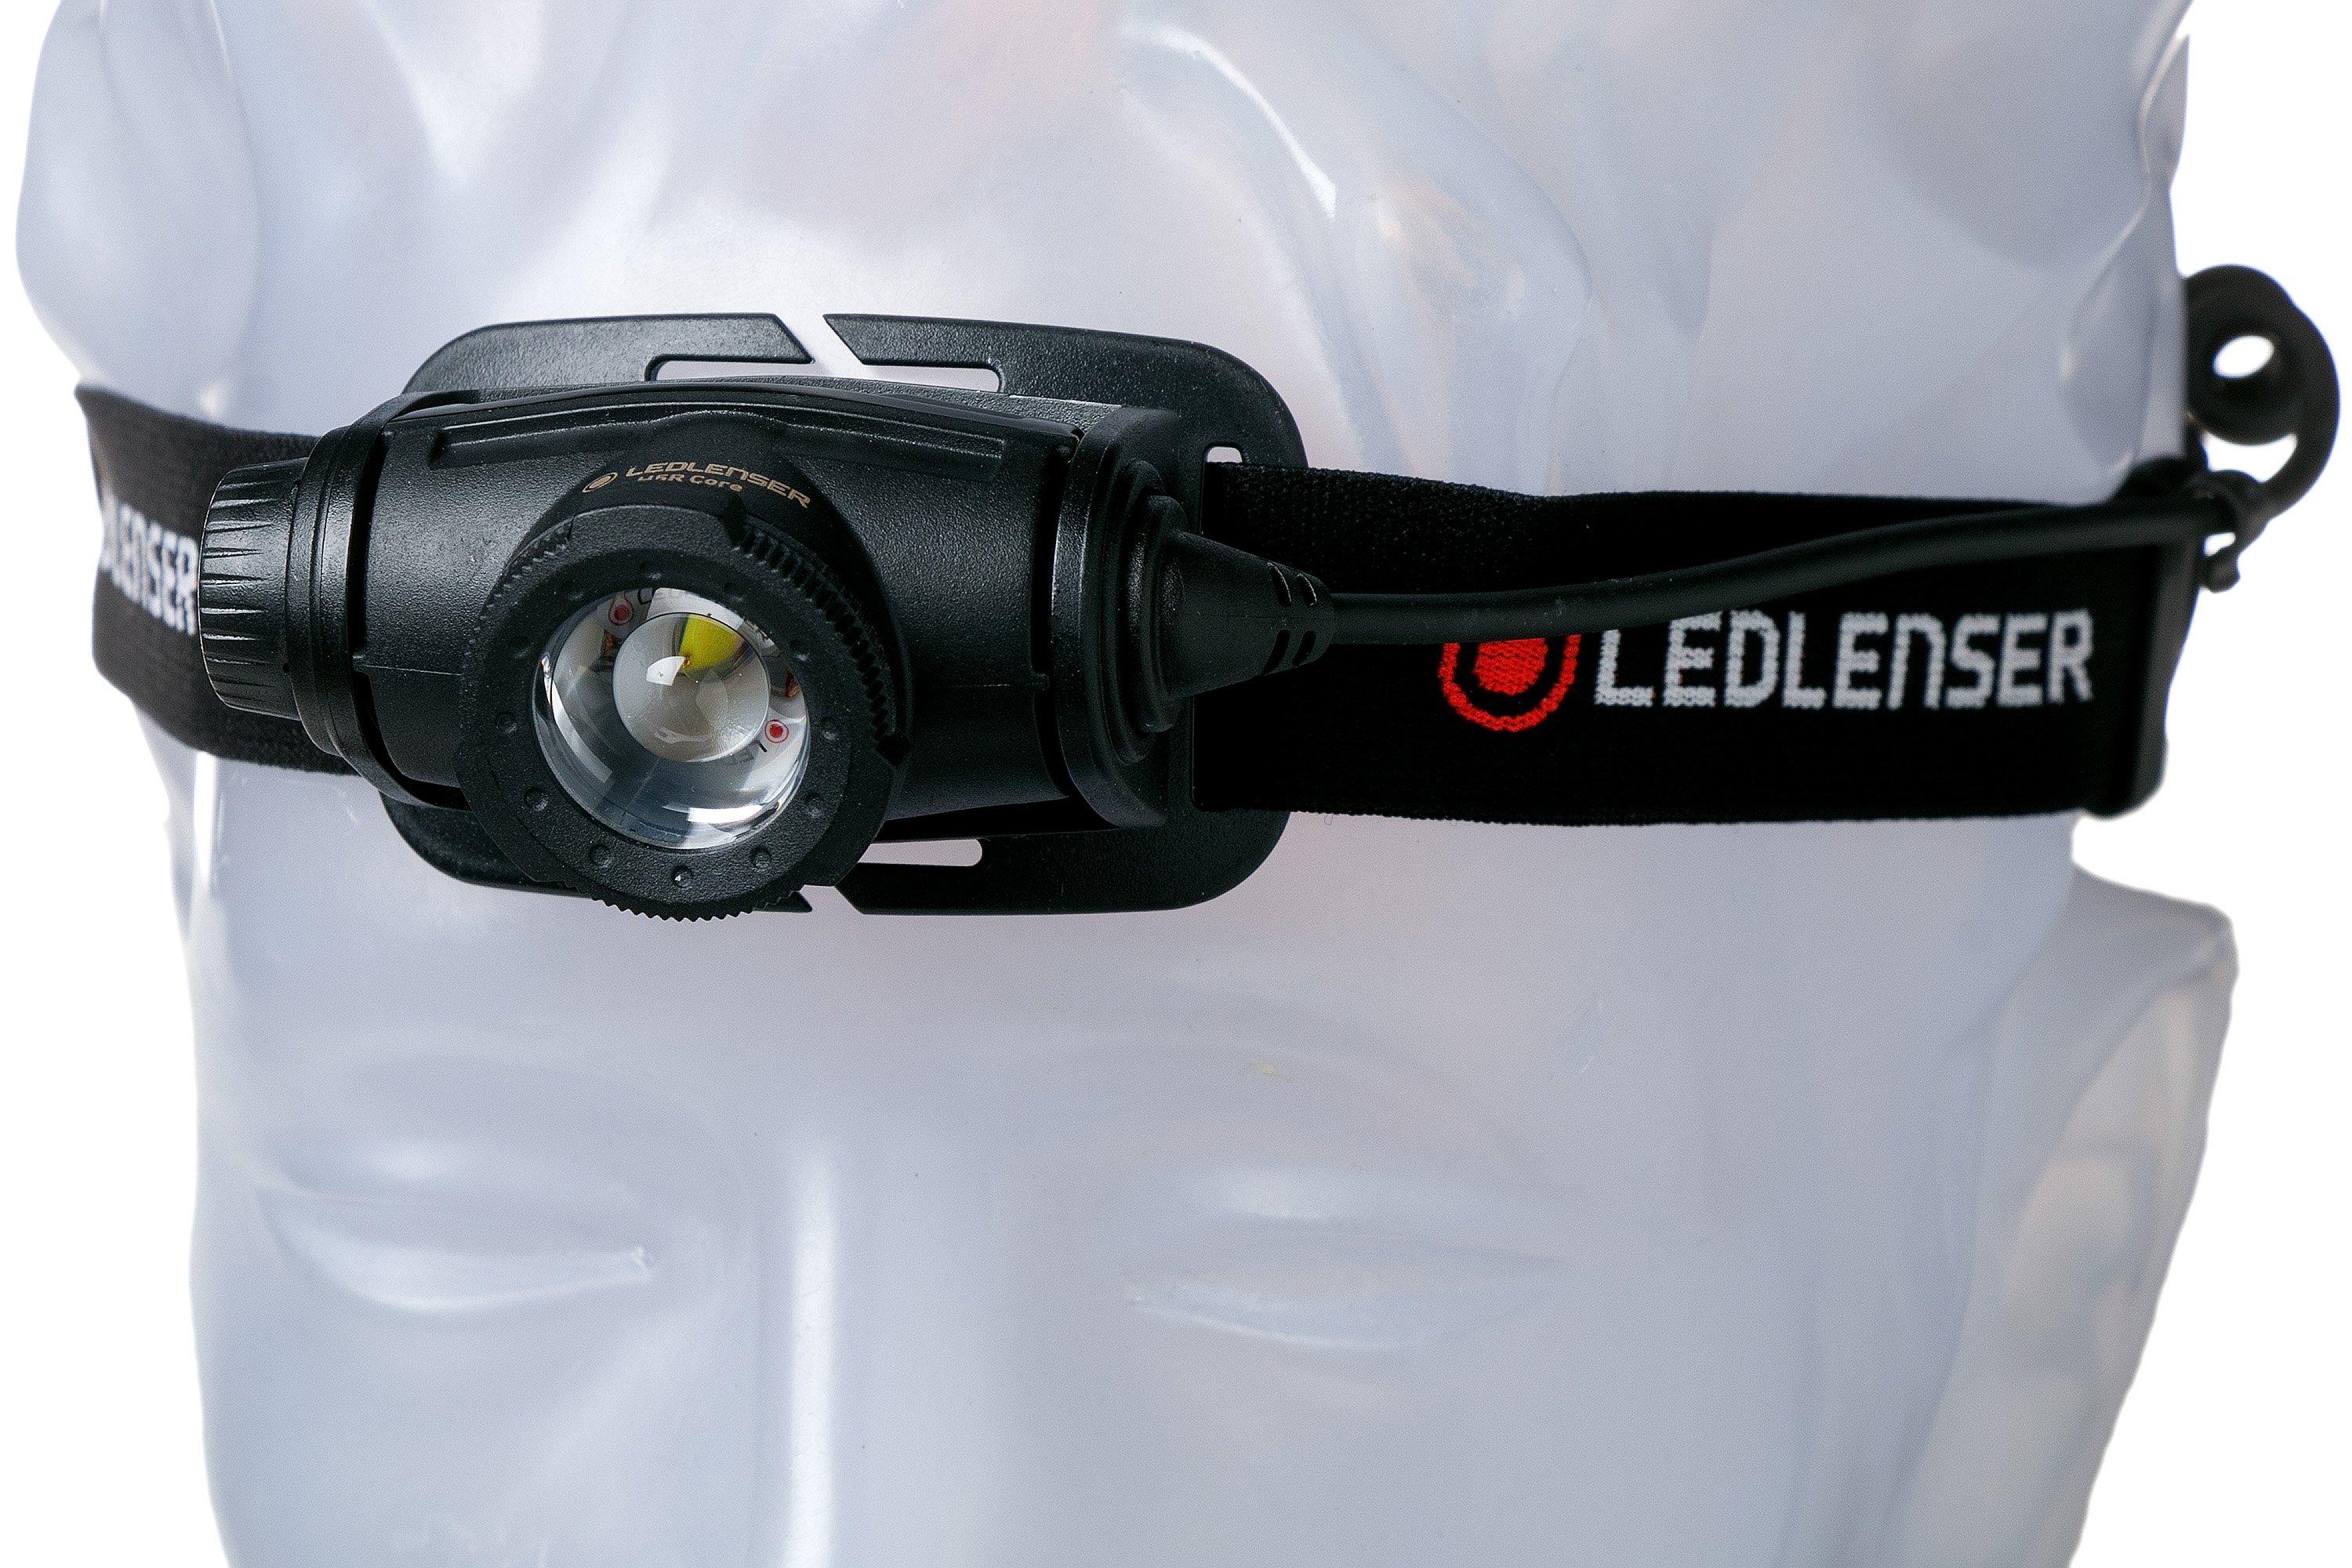 Ledlenser H5R Core rechargeable head torch | Advantageously shopping at